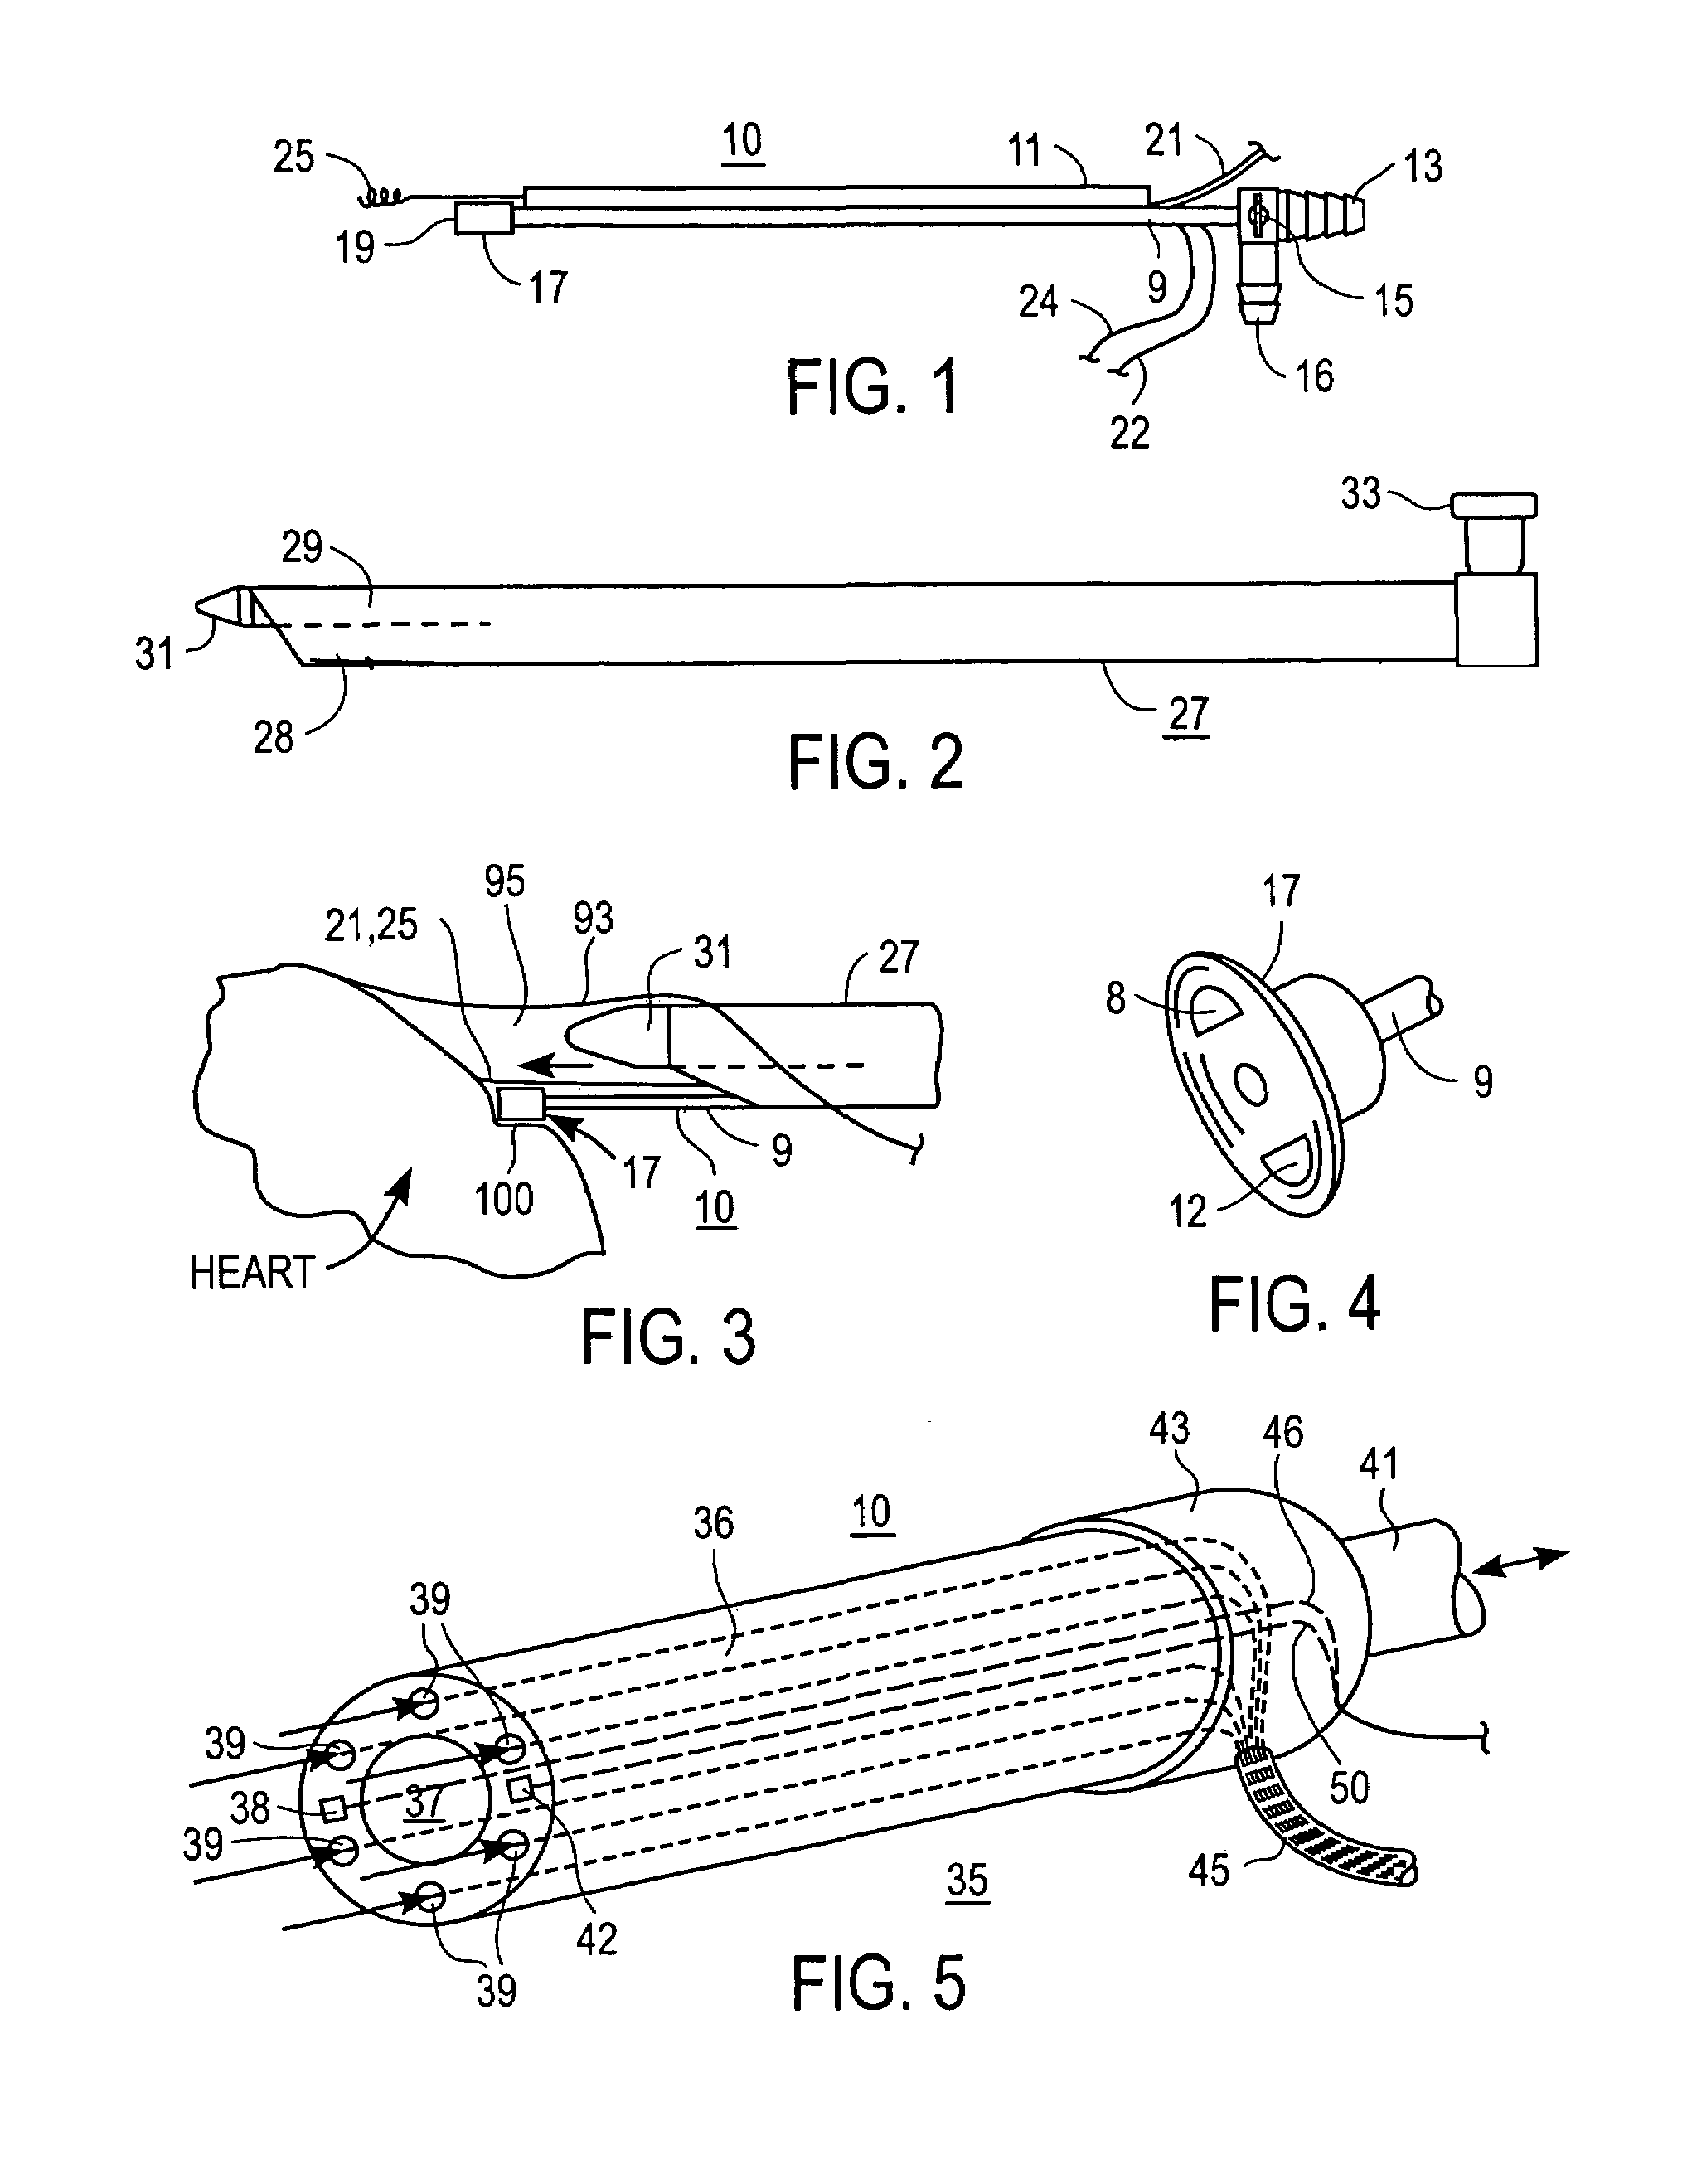 Apparatus for endoscopic cardiac mapping and lead placement